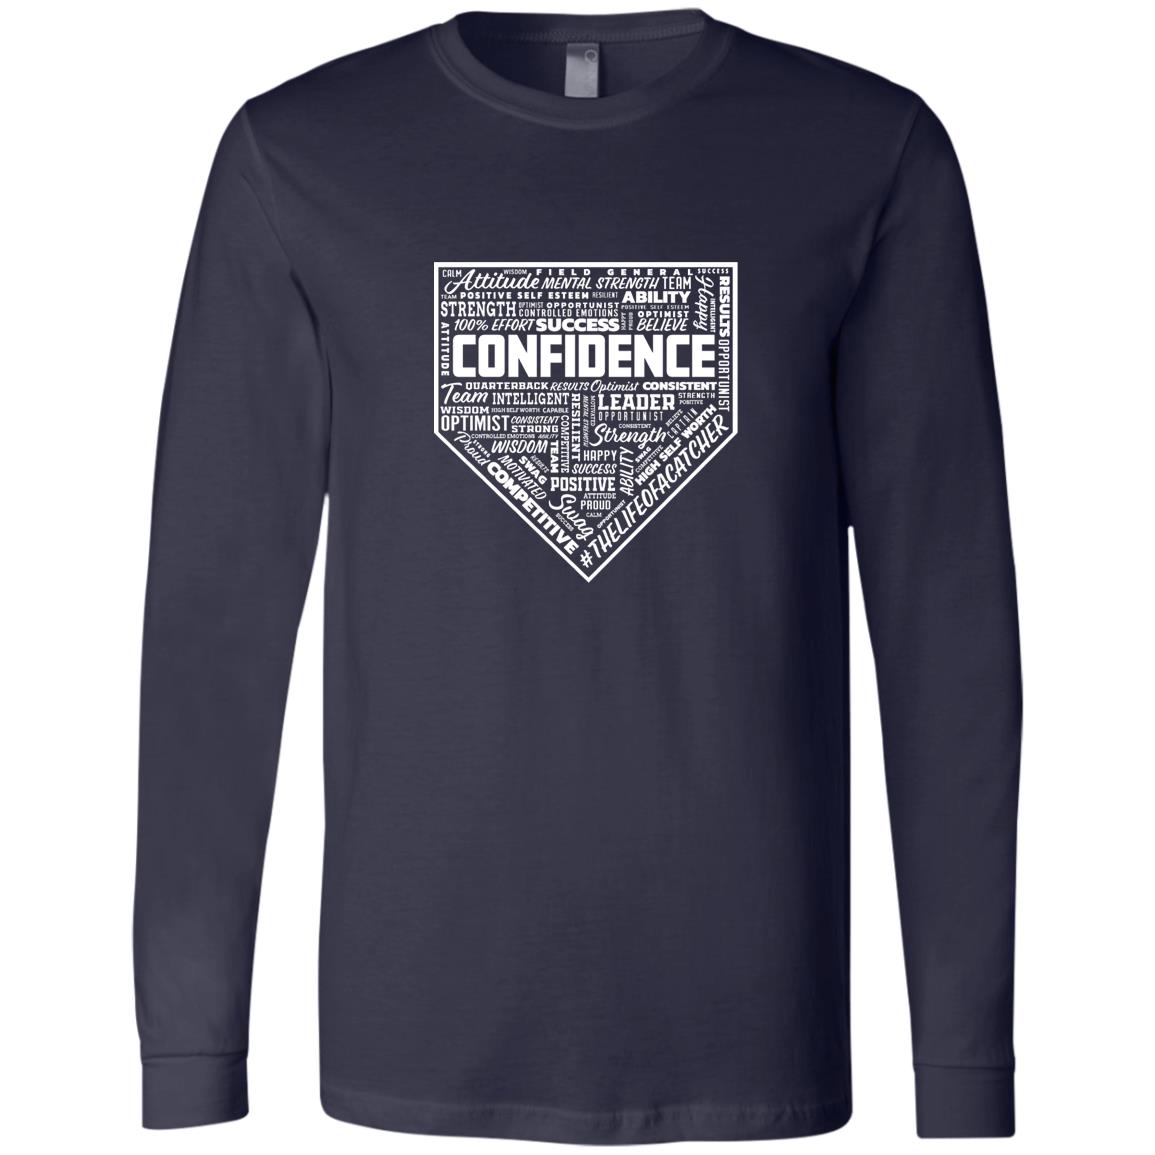 The Catching Guy Catcher Confidence Jersey Tee in navy